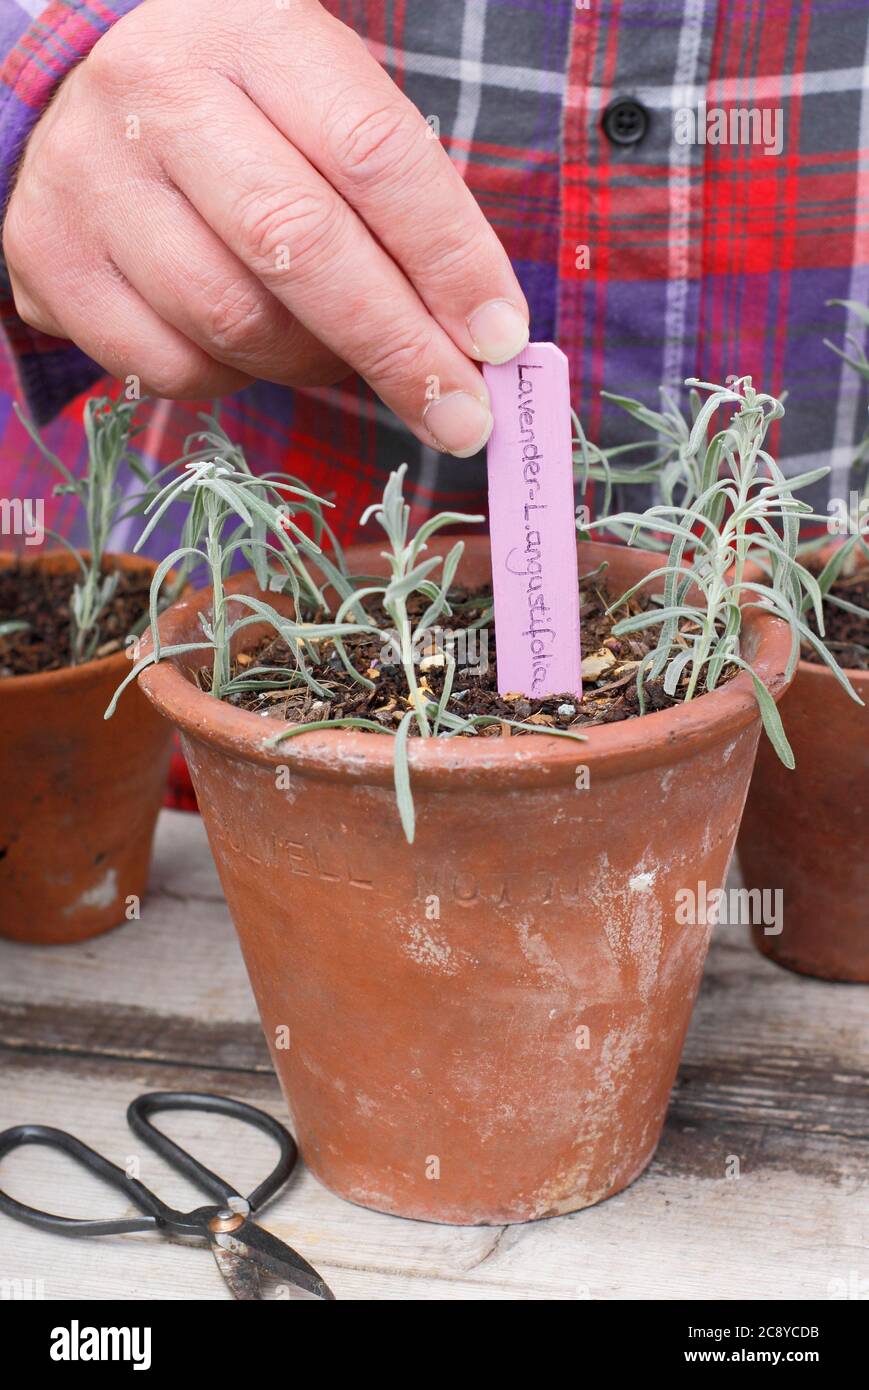 Plant cuttings from Lavandula angustifolia. New lavender plant cuttings ready for placing in a warm, moist environment. UK Stock Photo